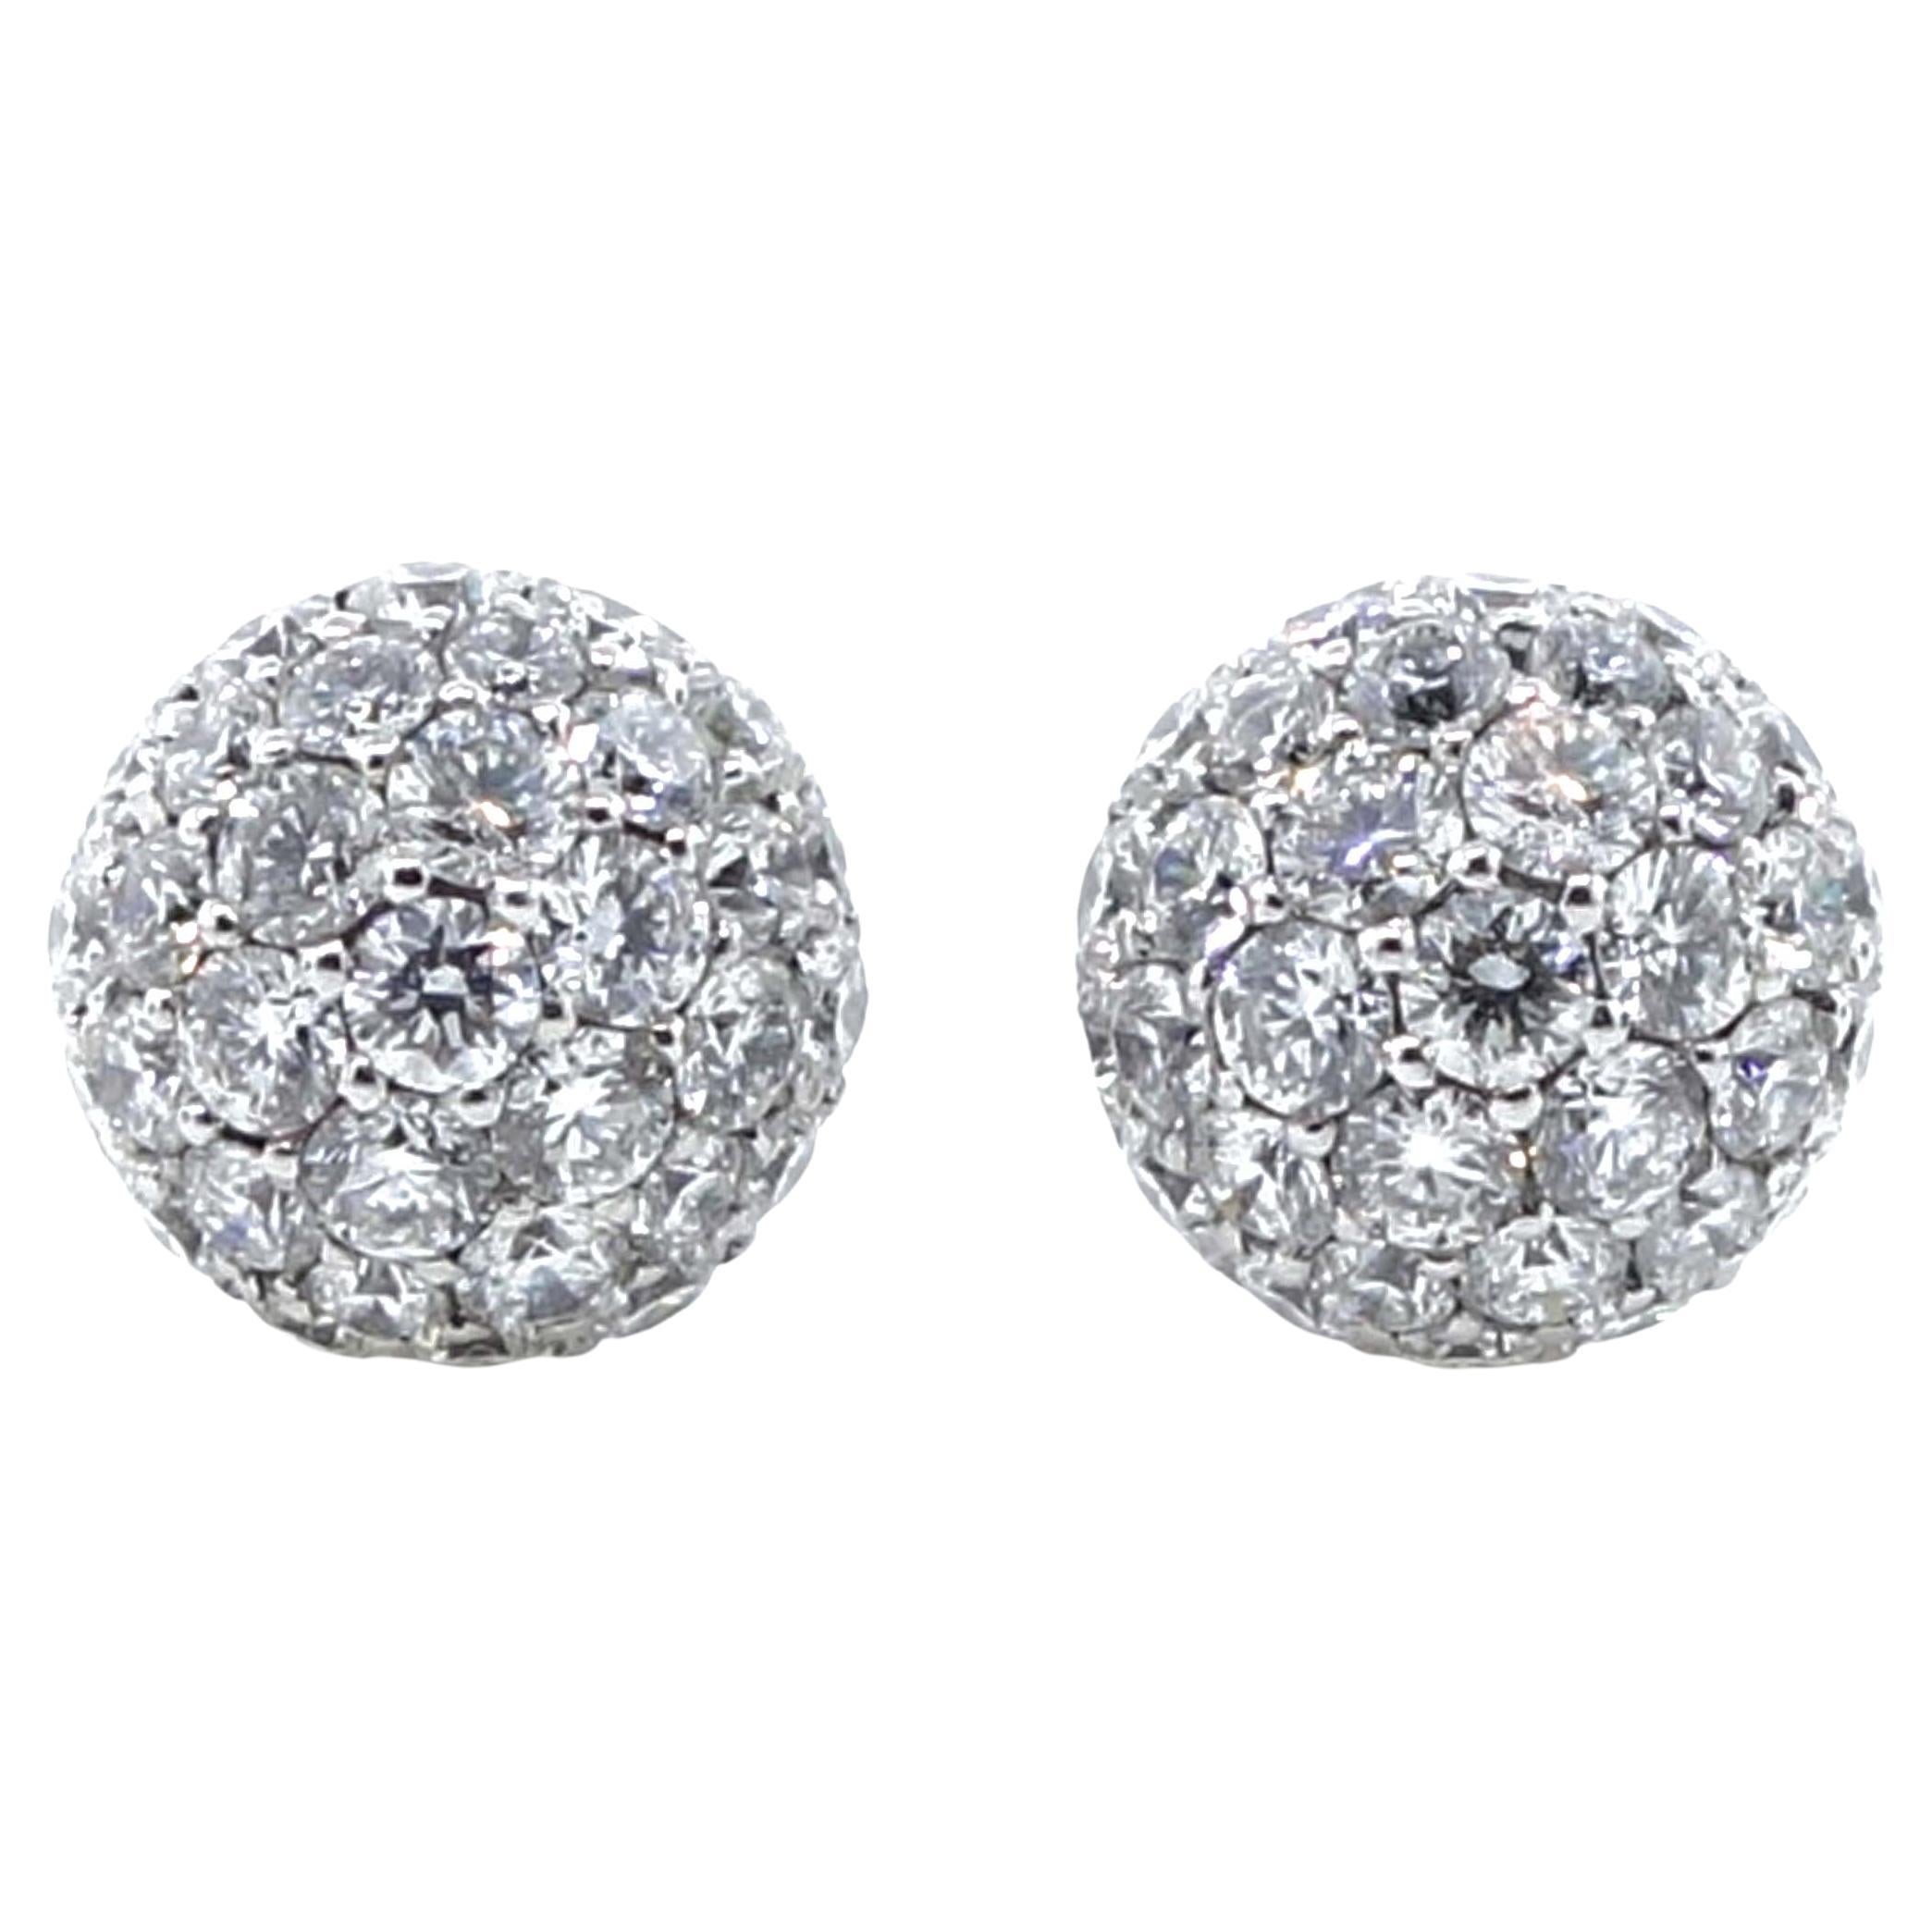 0.70 Carat Pave Earrings in 18k White Gold